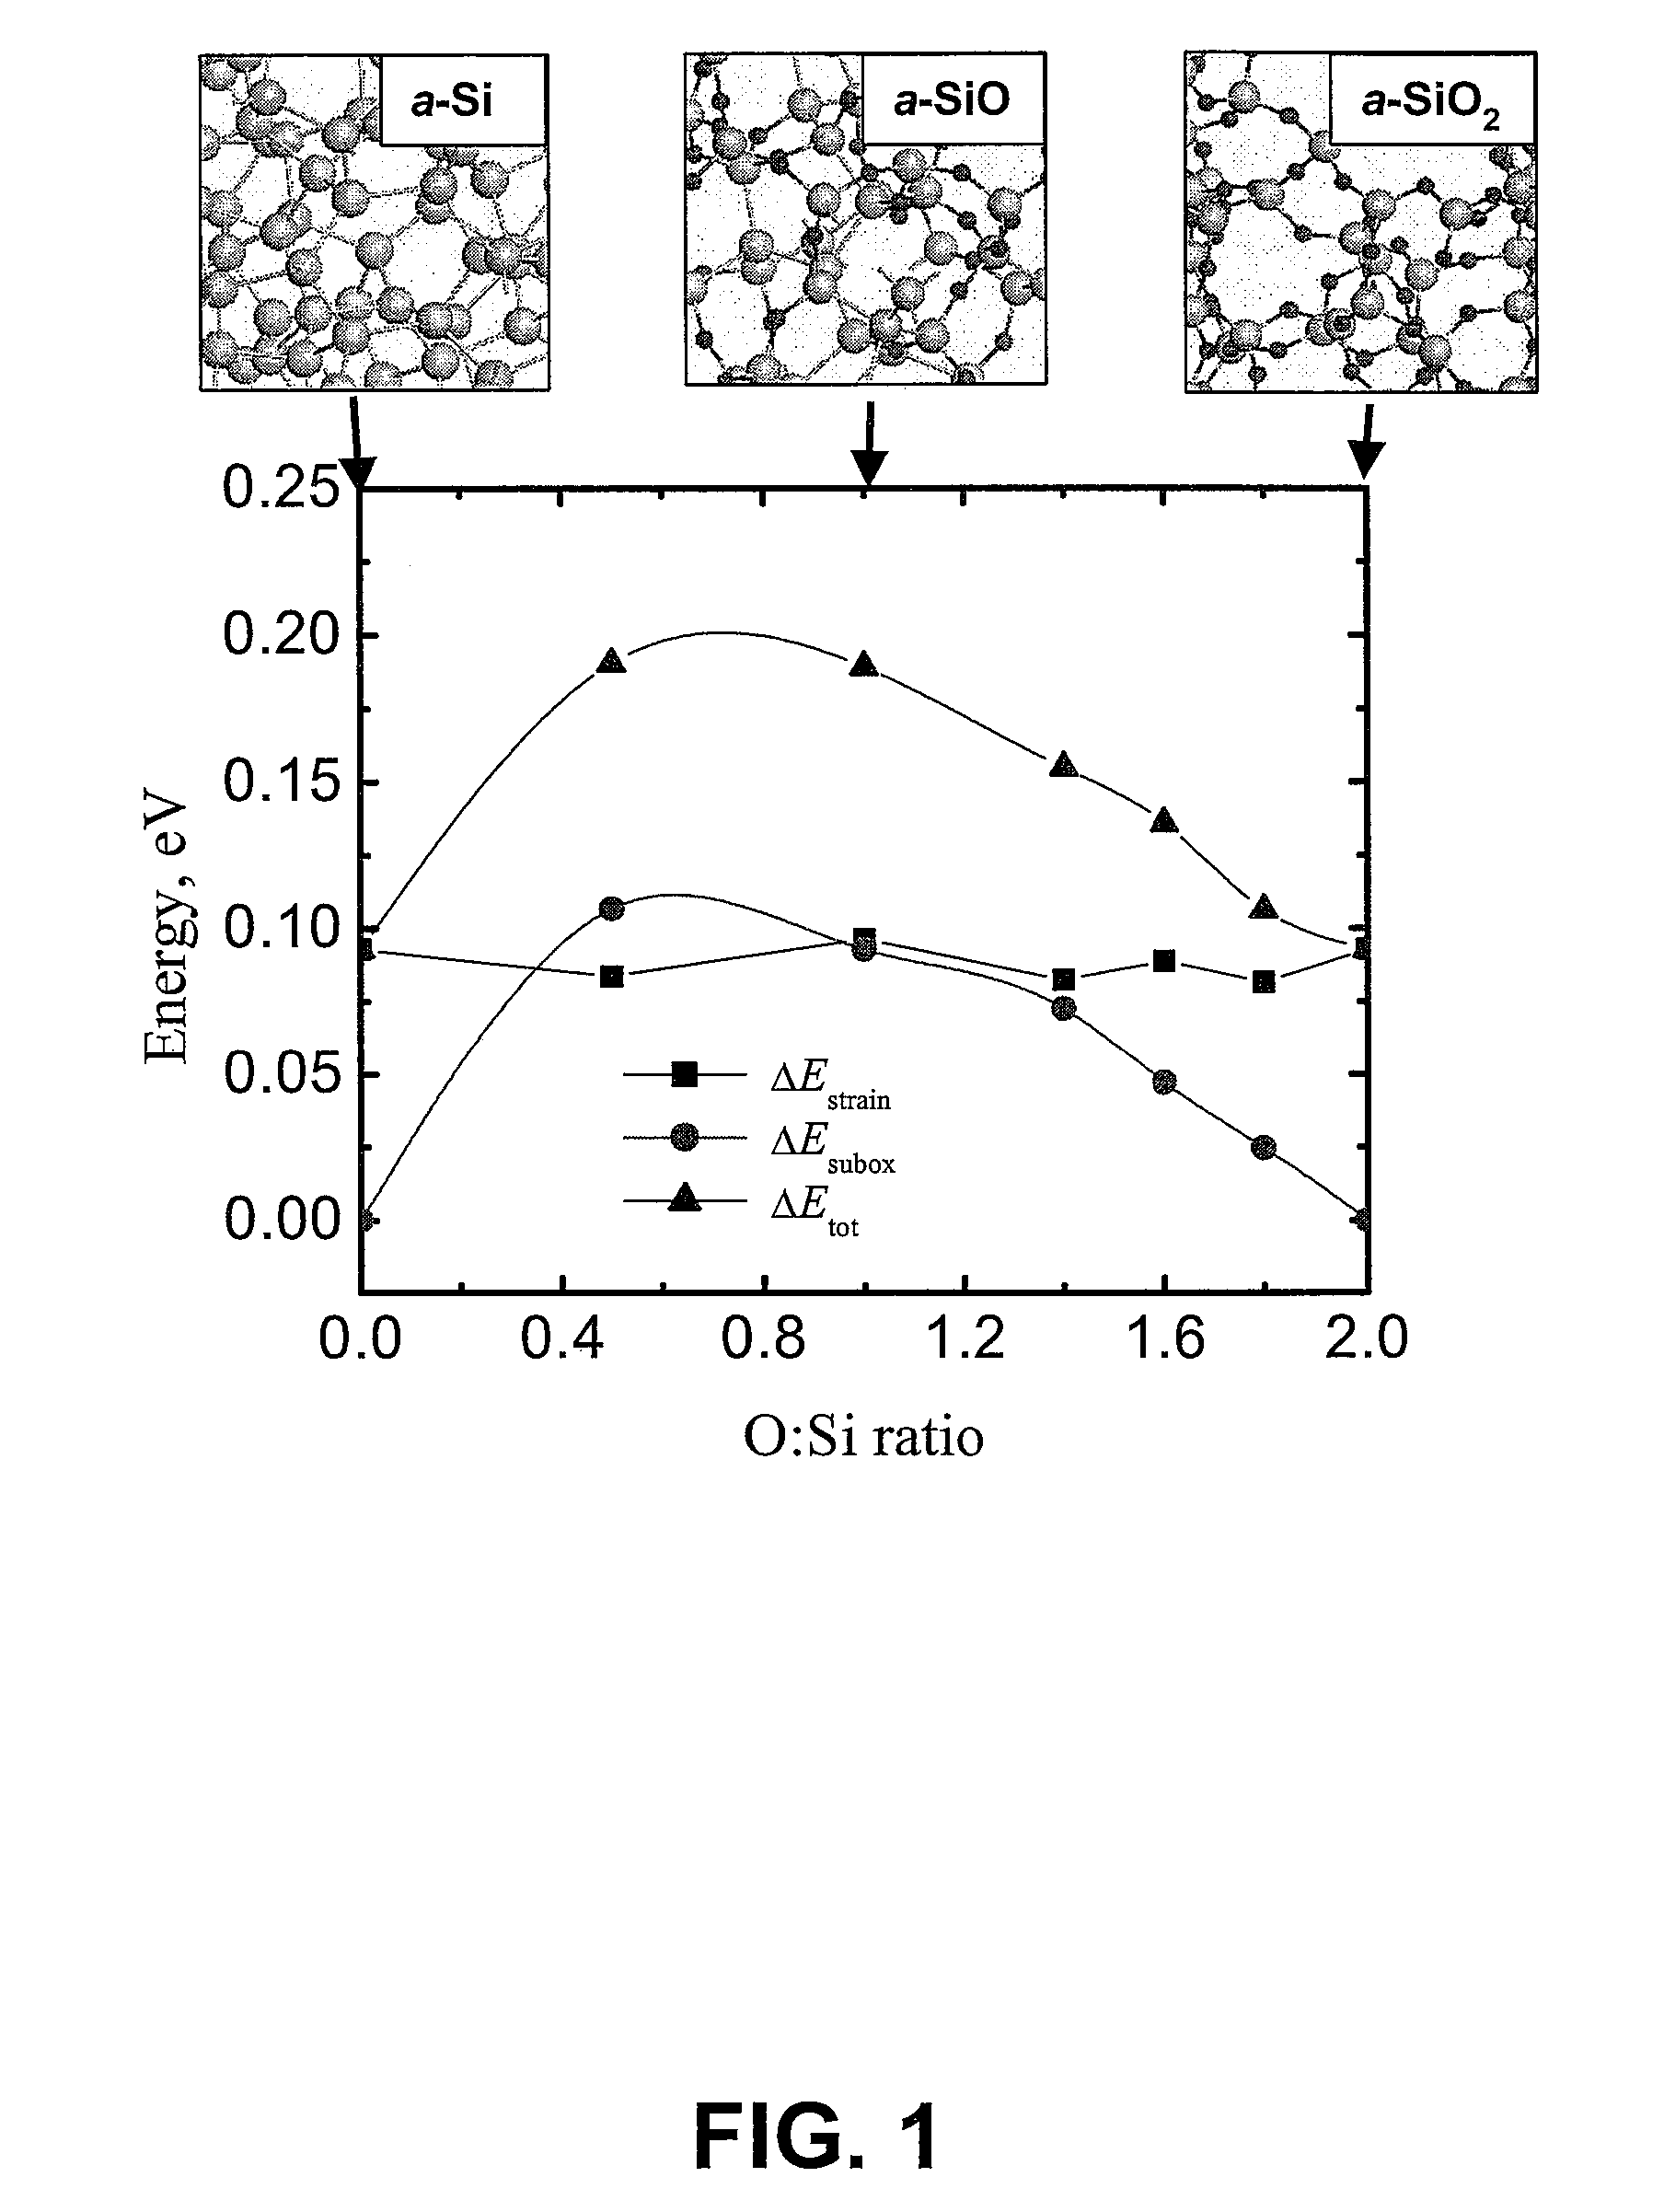 Method for predicting the formation of silicon nanocrystals in embedded oxide matrices